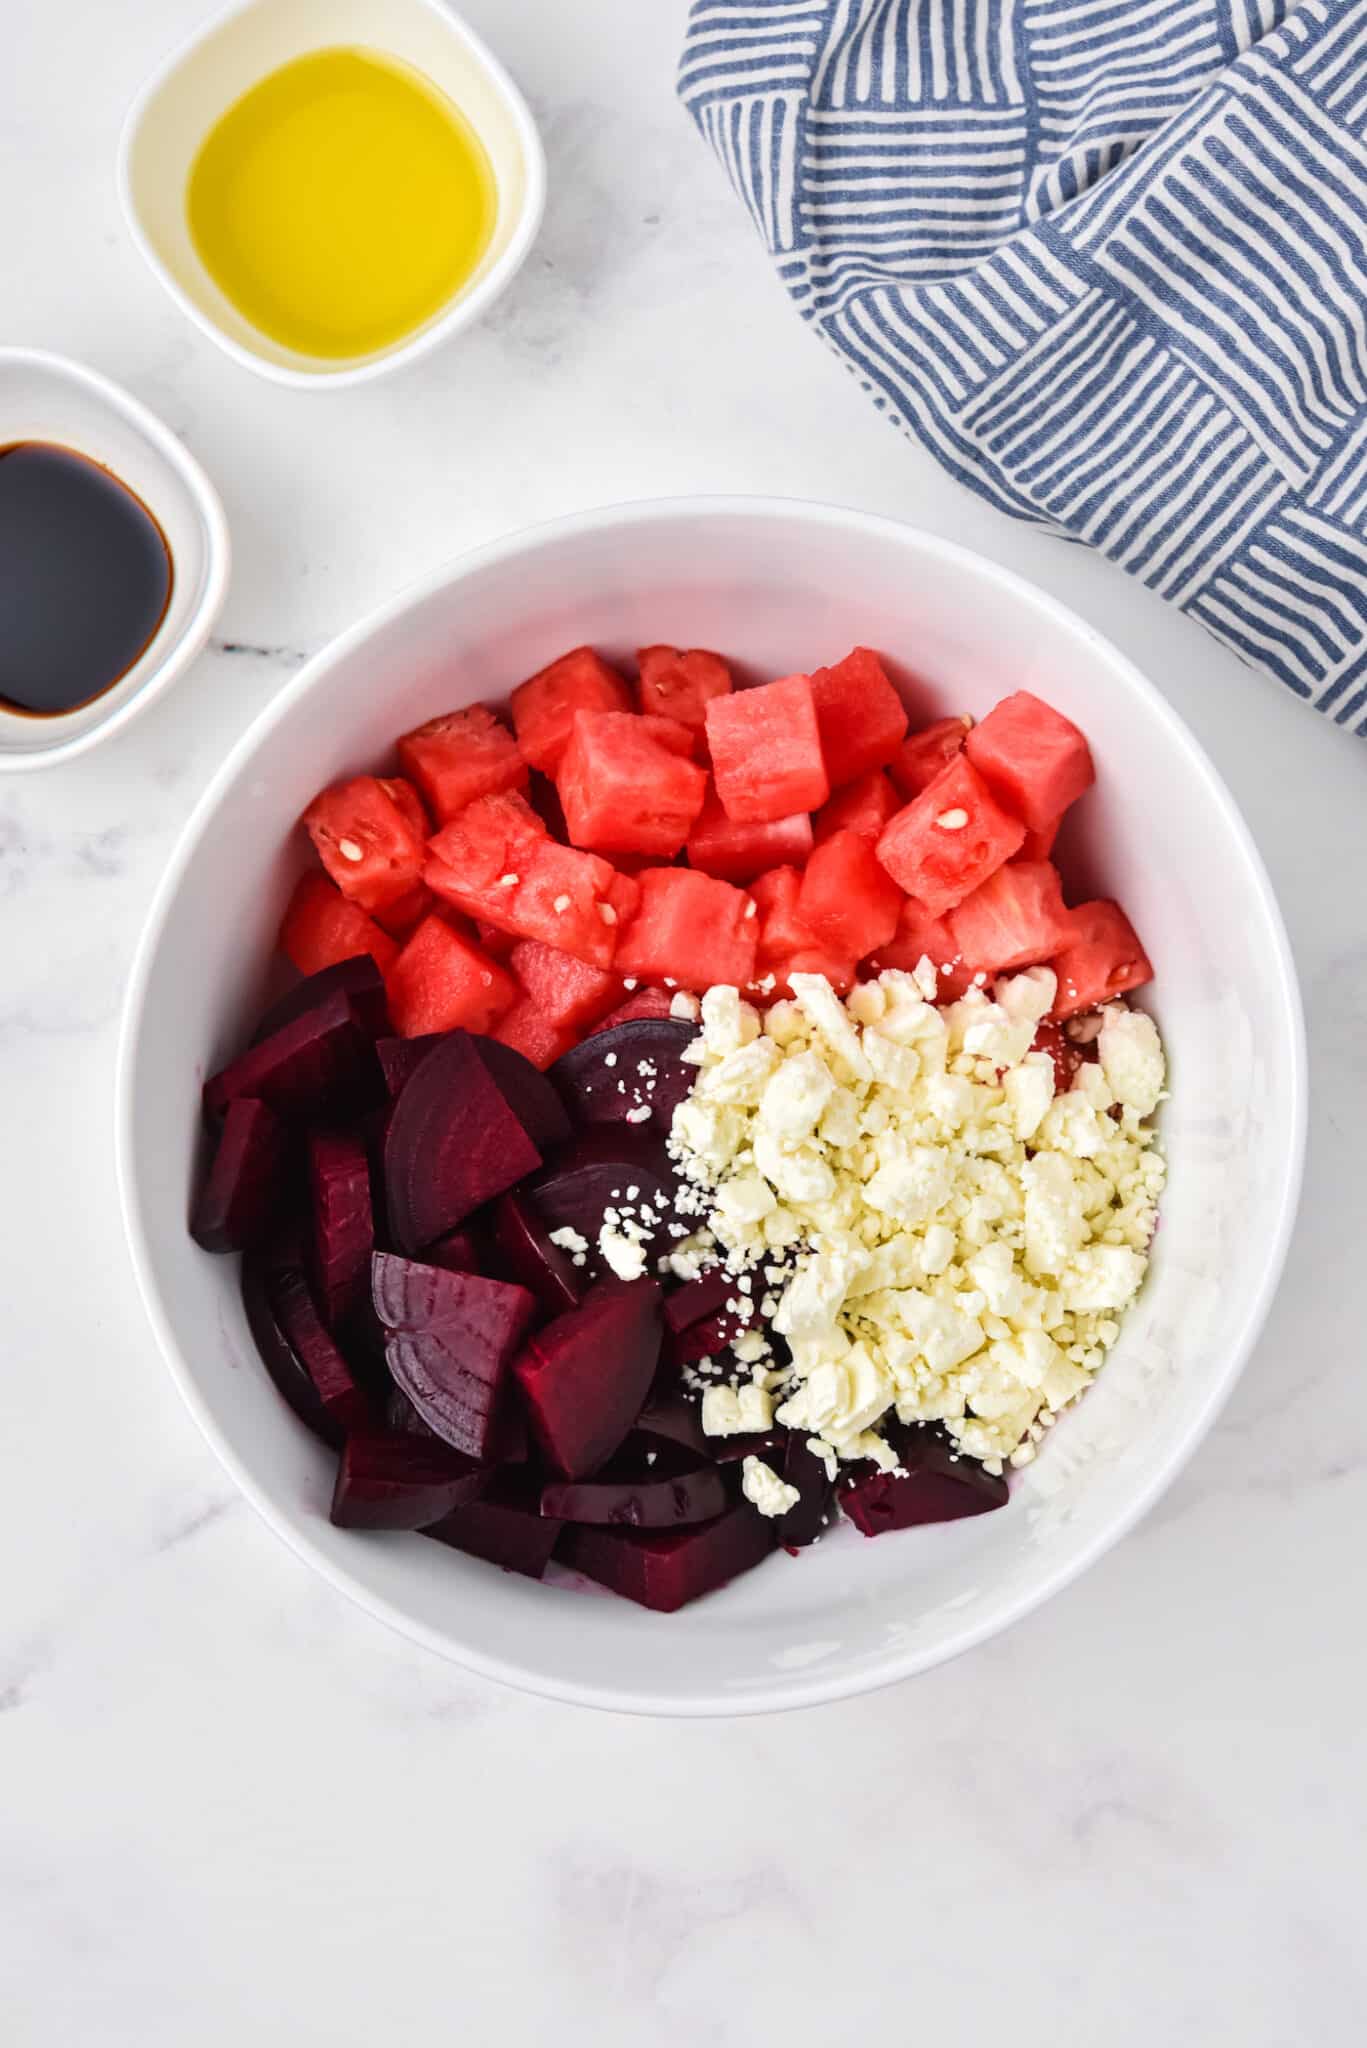 Beets, watermelon cubes, and crumbled feta in a white serving bowl.